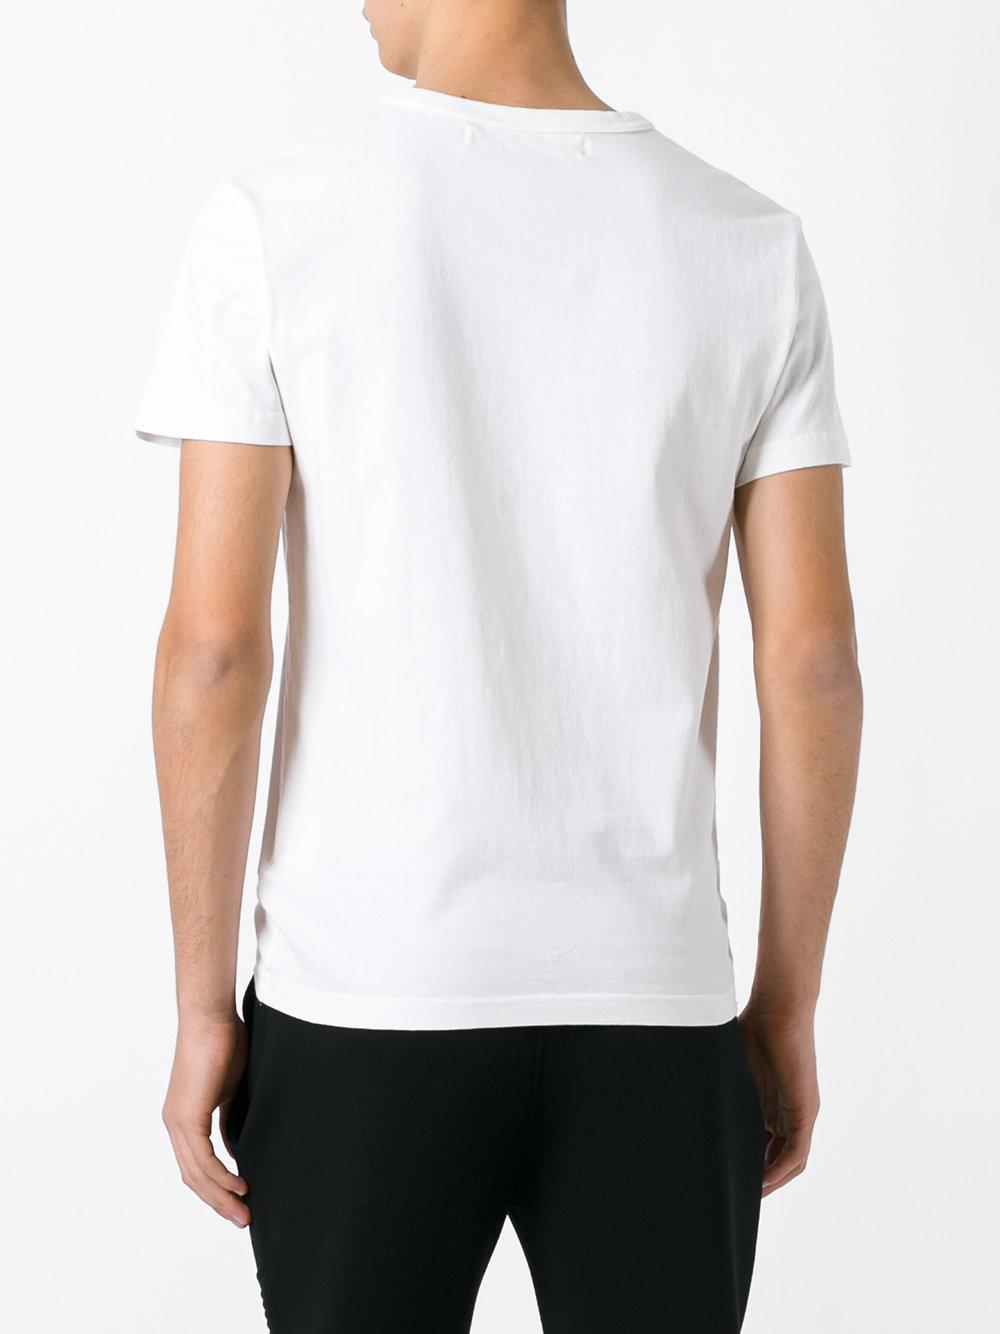 Lyst - Off-White C/O Virgil Abloh Embroidered Text T-shirt in White for Men